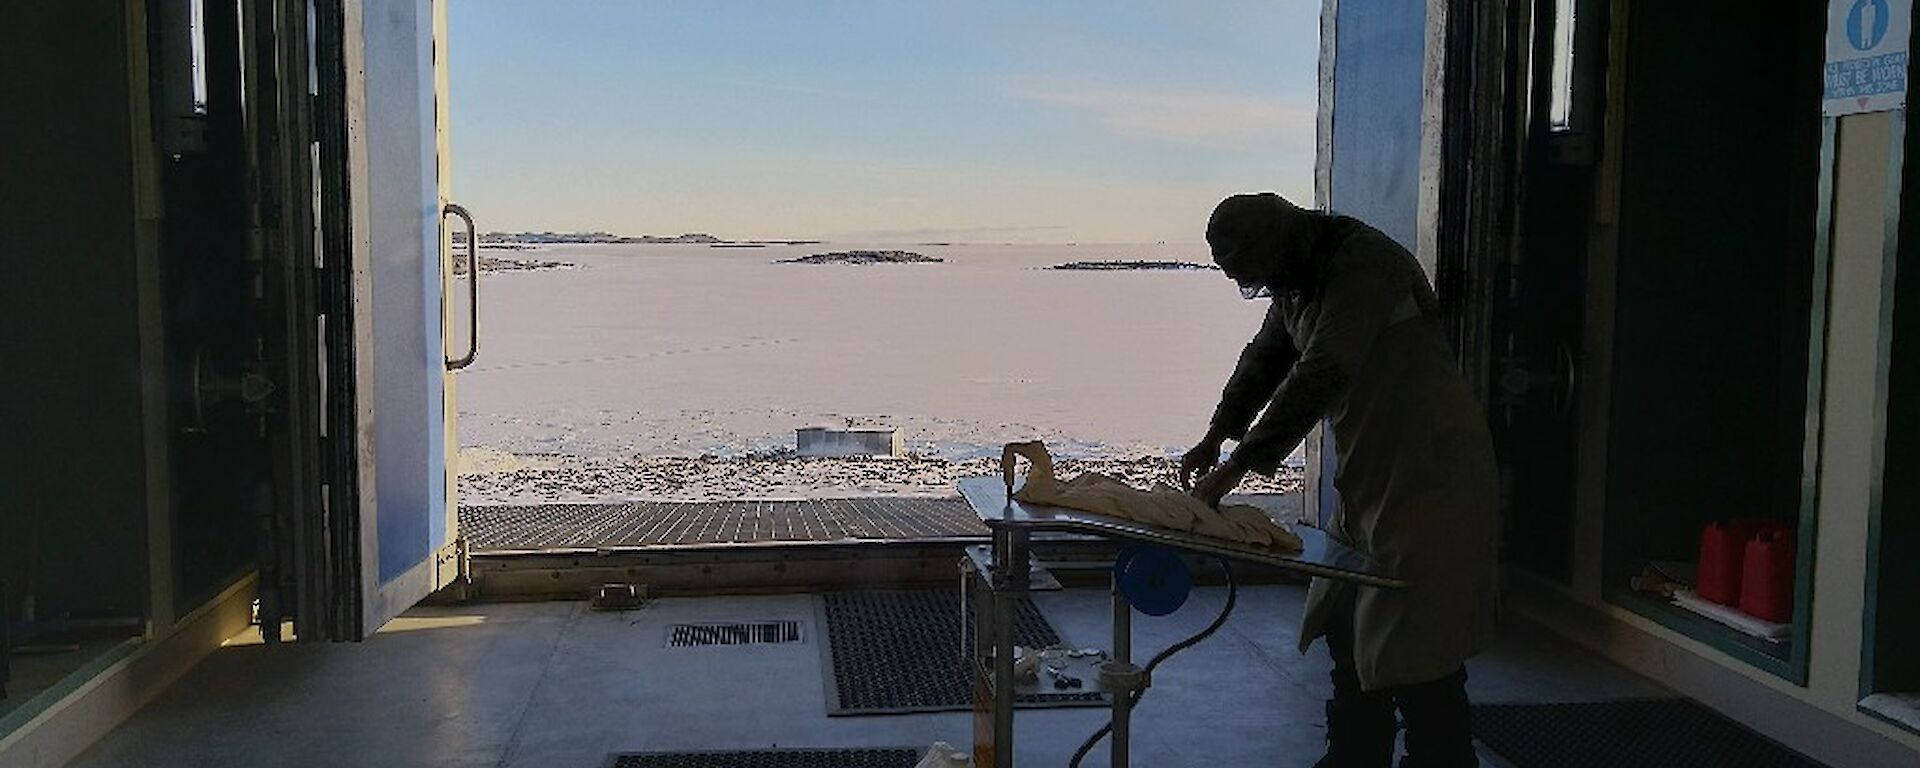 A man stands in a hut prepares a weather balloon for inflation at a small table.   Large doors are open and the Antarctic landscape can be seen behind the man.